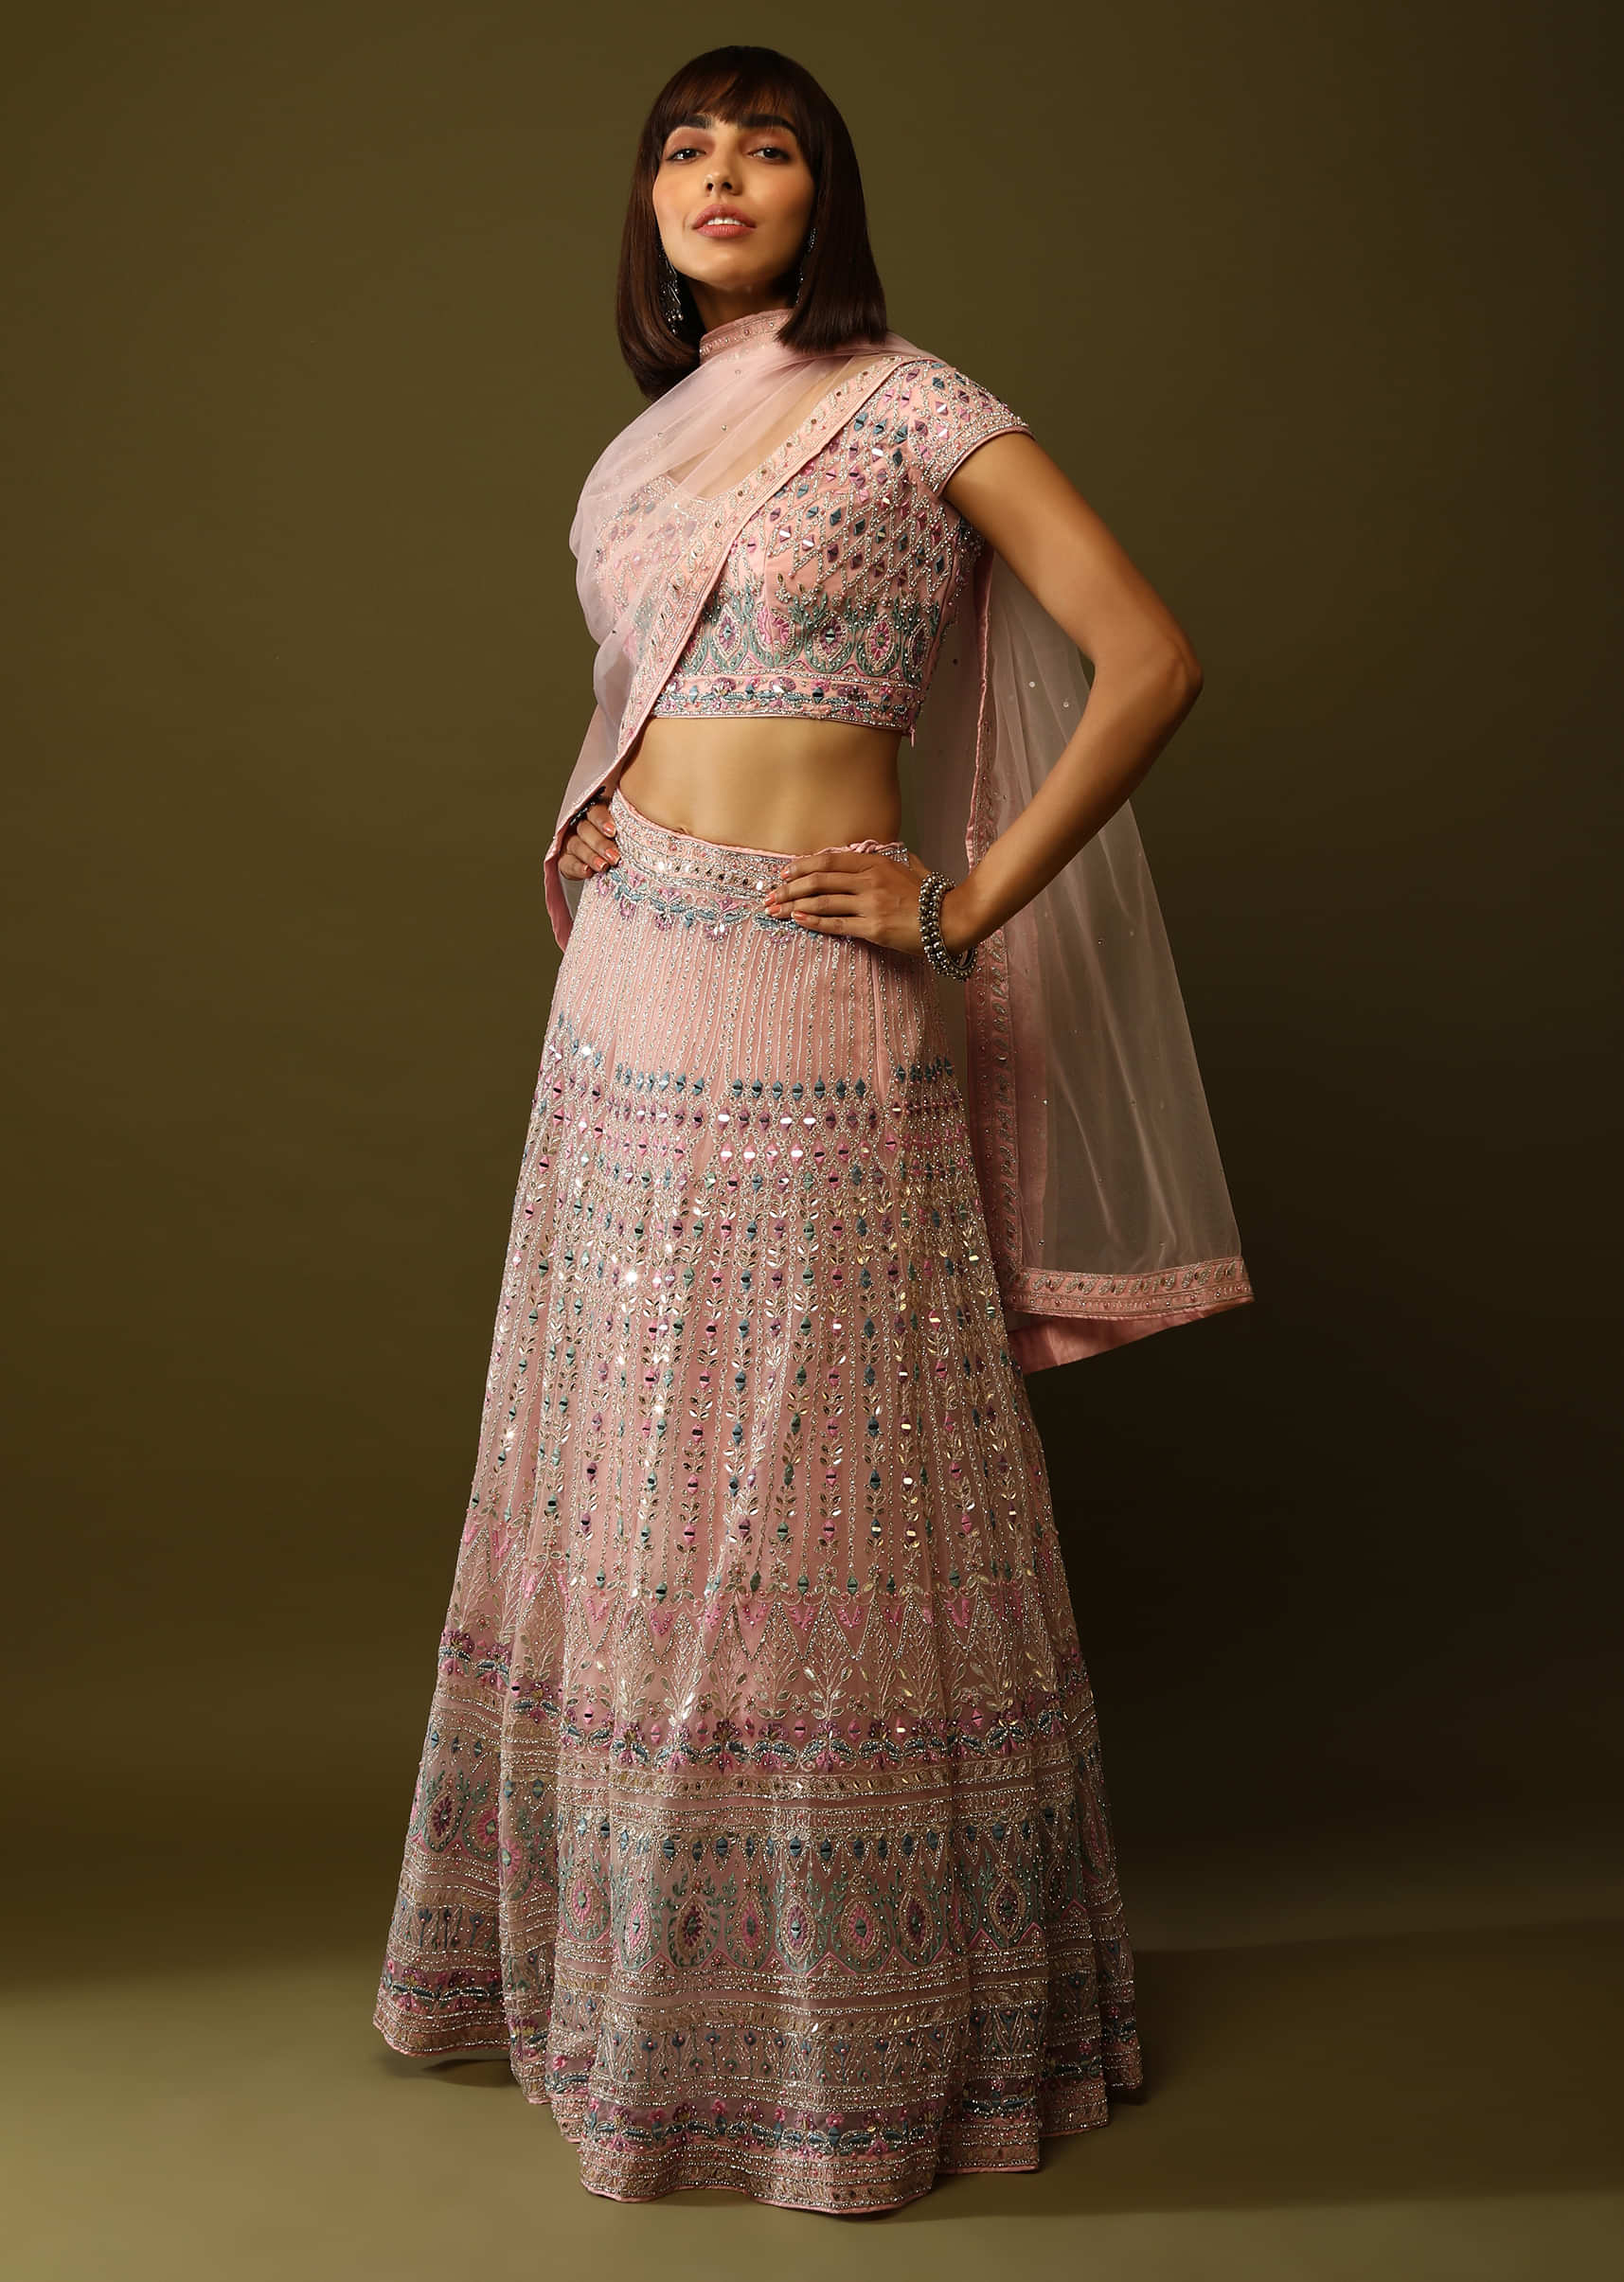 Pastel Pink Lehenga Choli In Net With Multi Colored Resham And Abla embroidery Mughal Motifs  